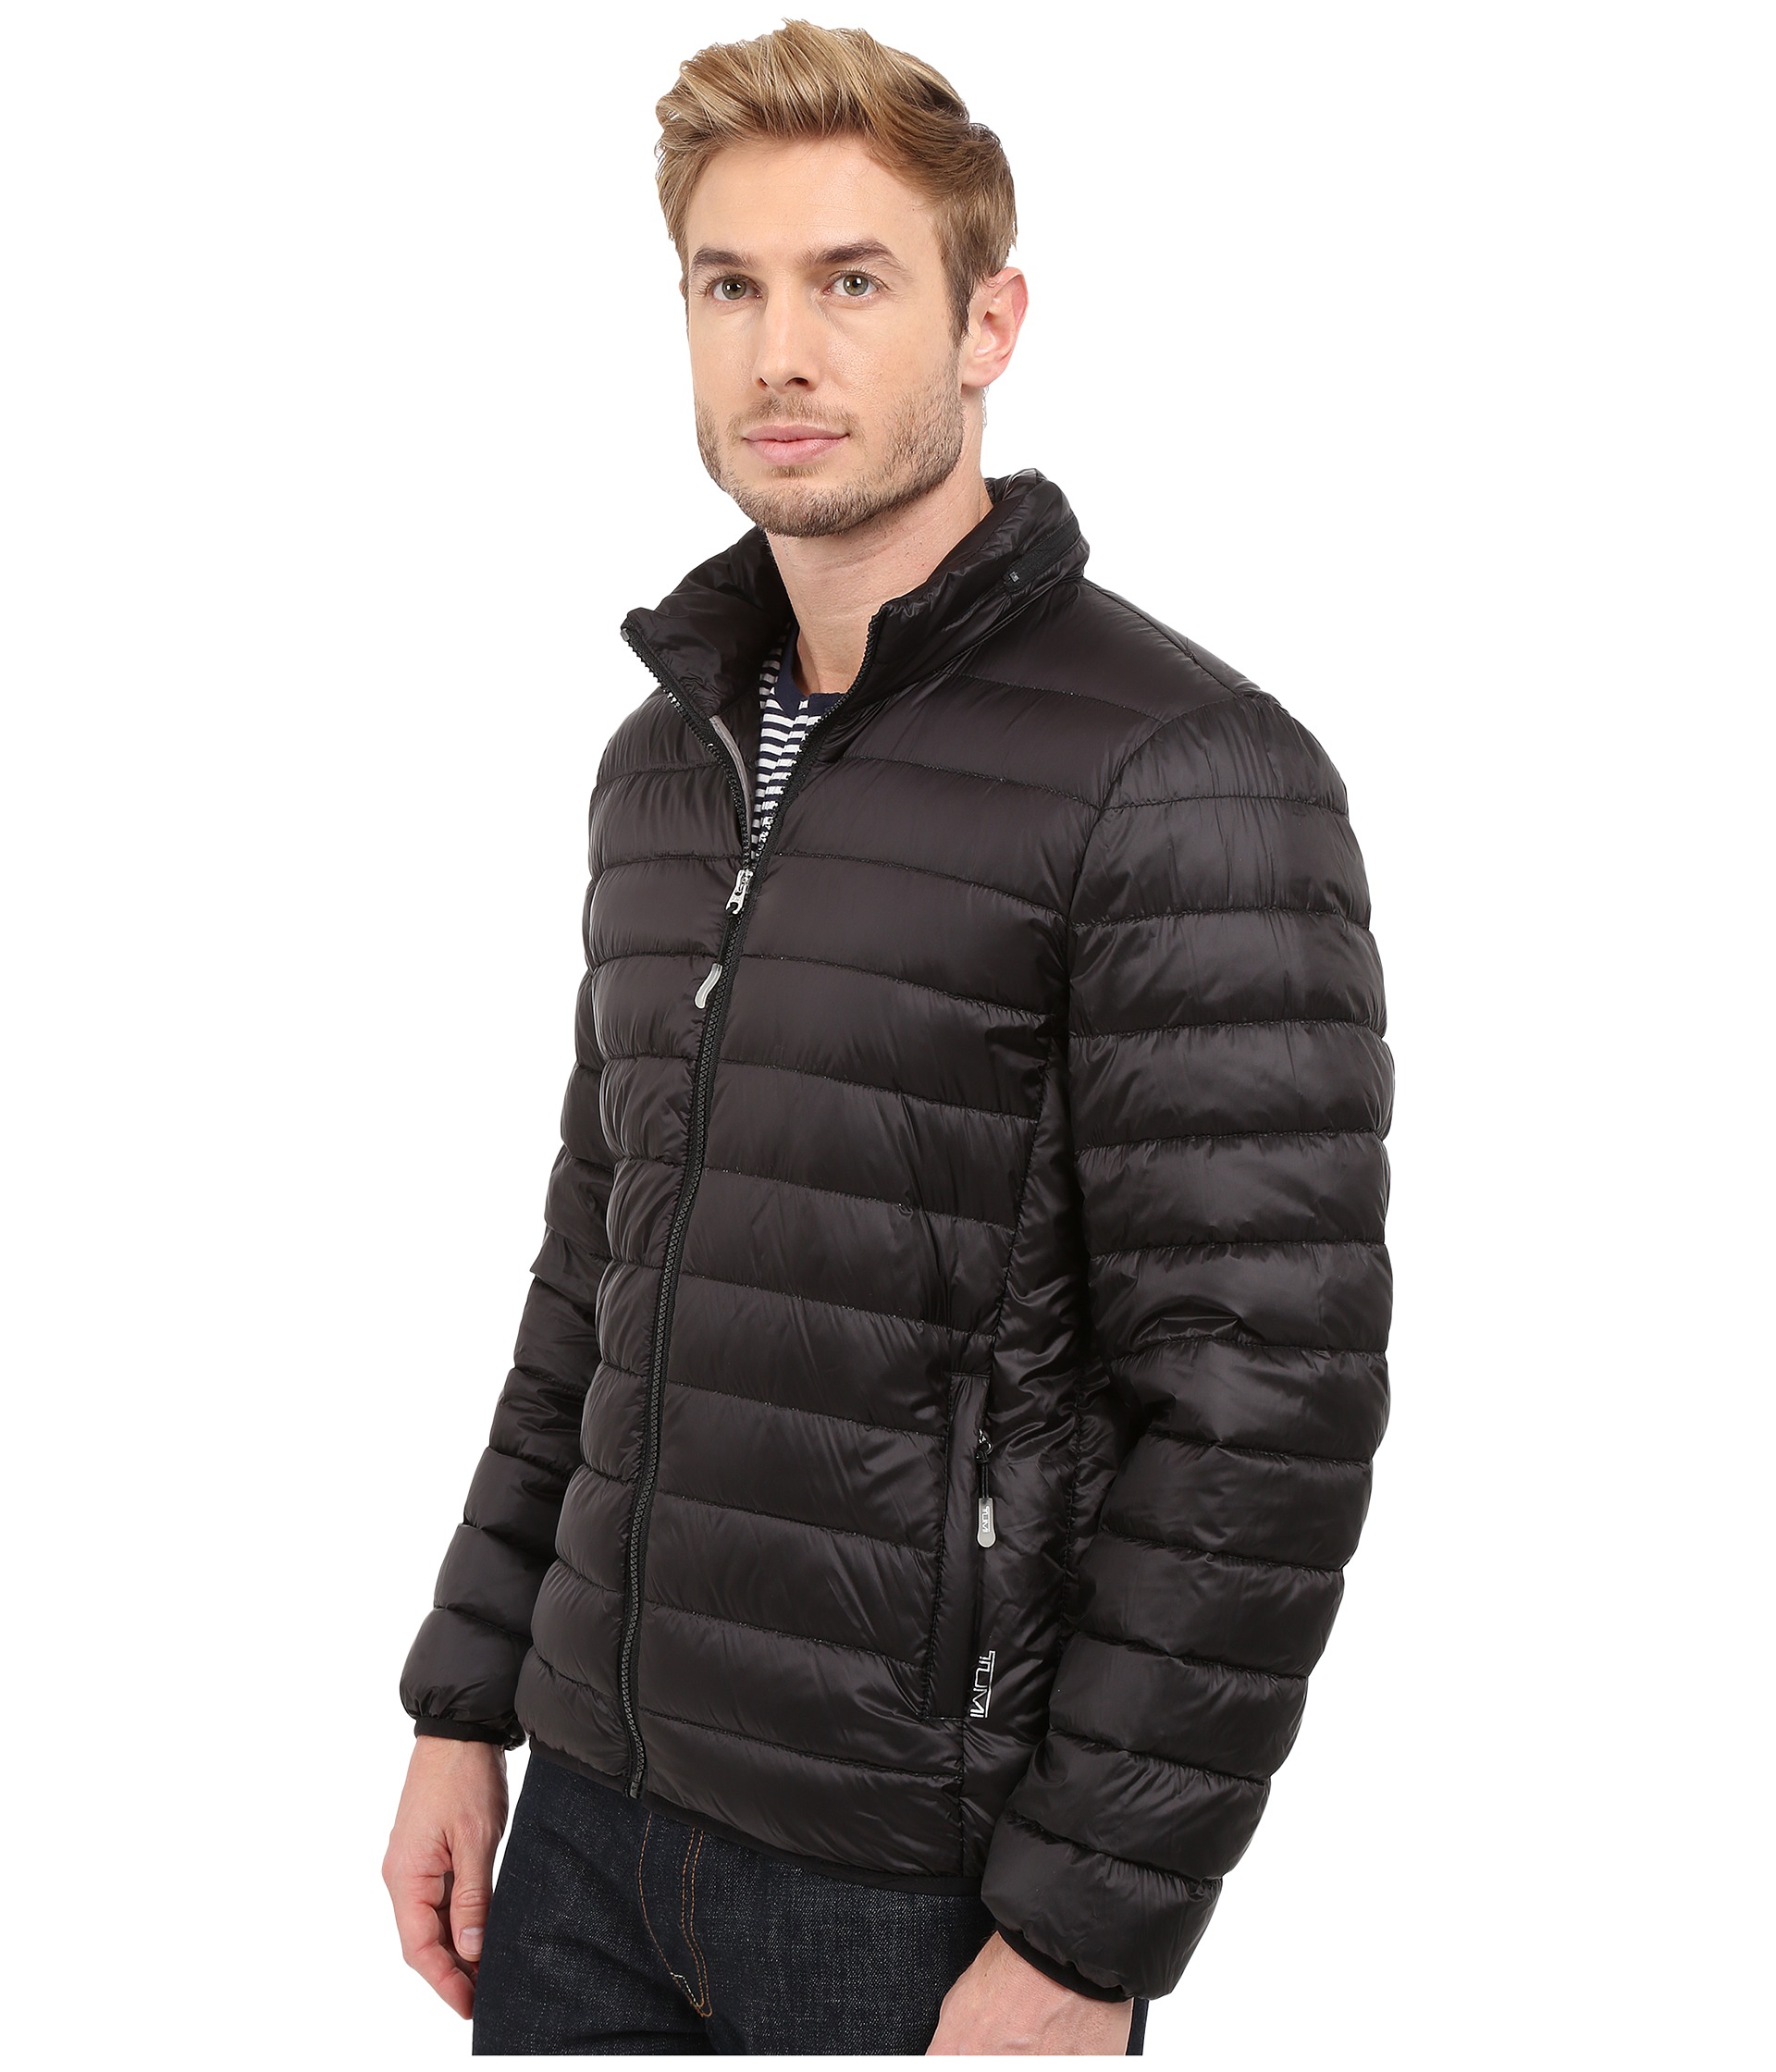 Tumi Patrol Packable Travel Puffer Jacket at Zappos.com